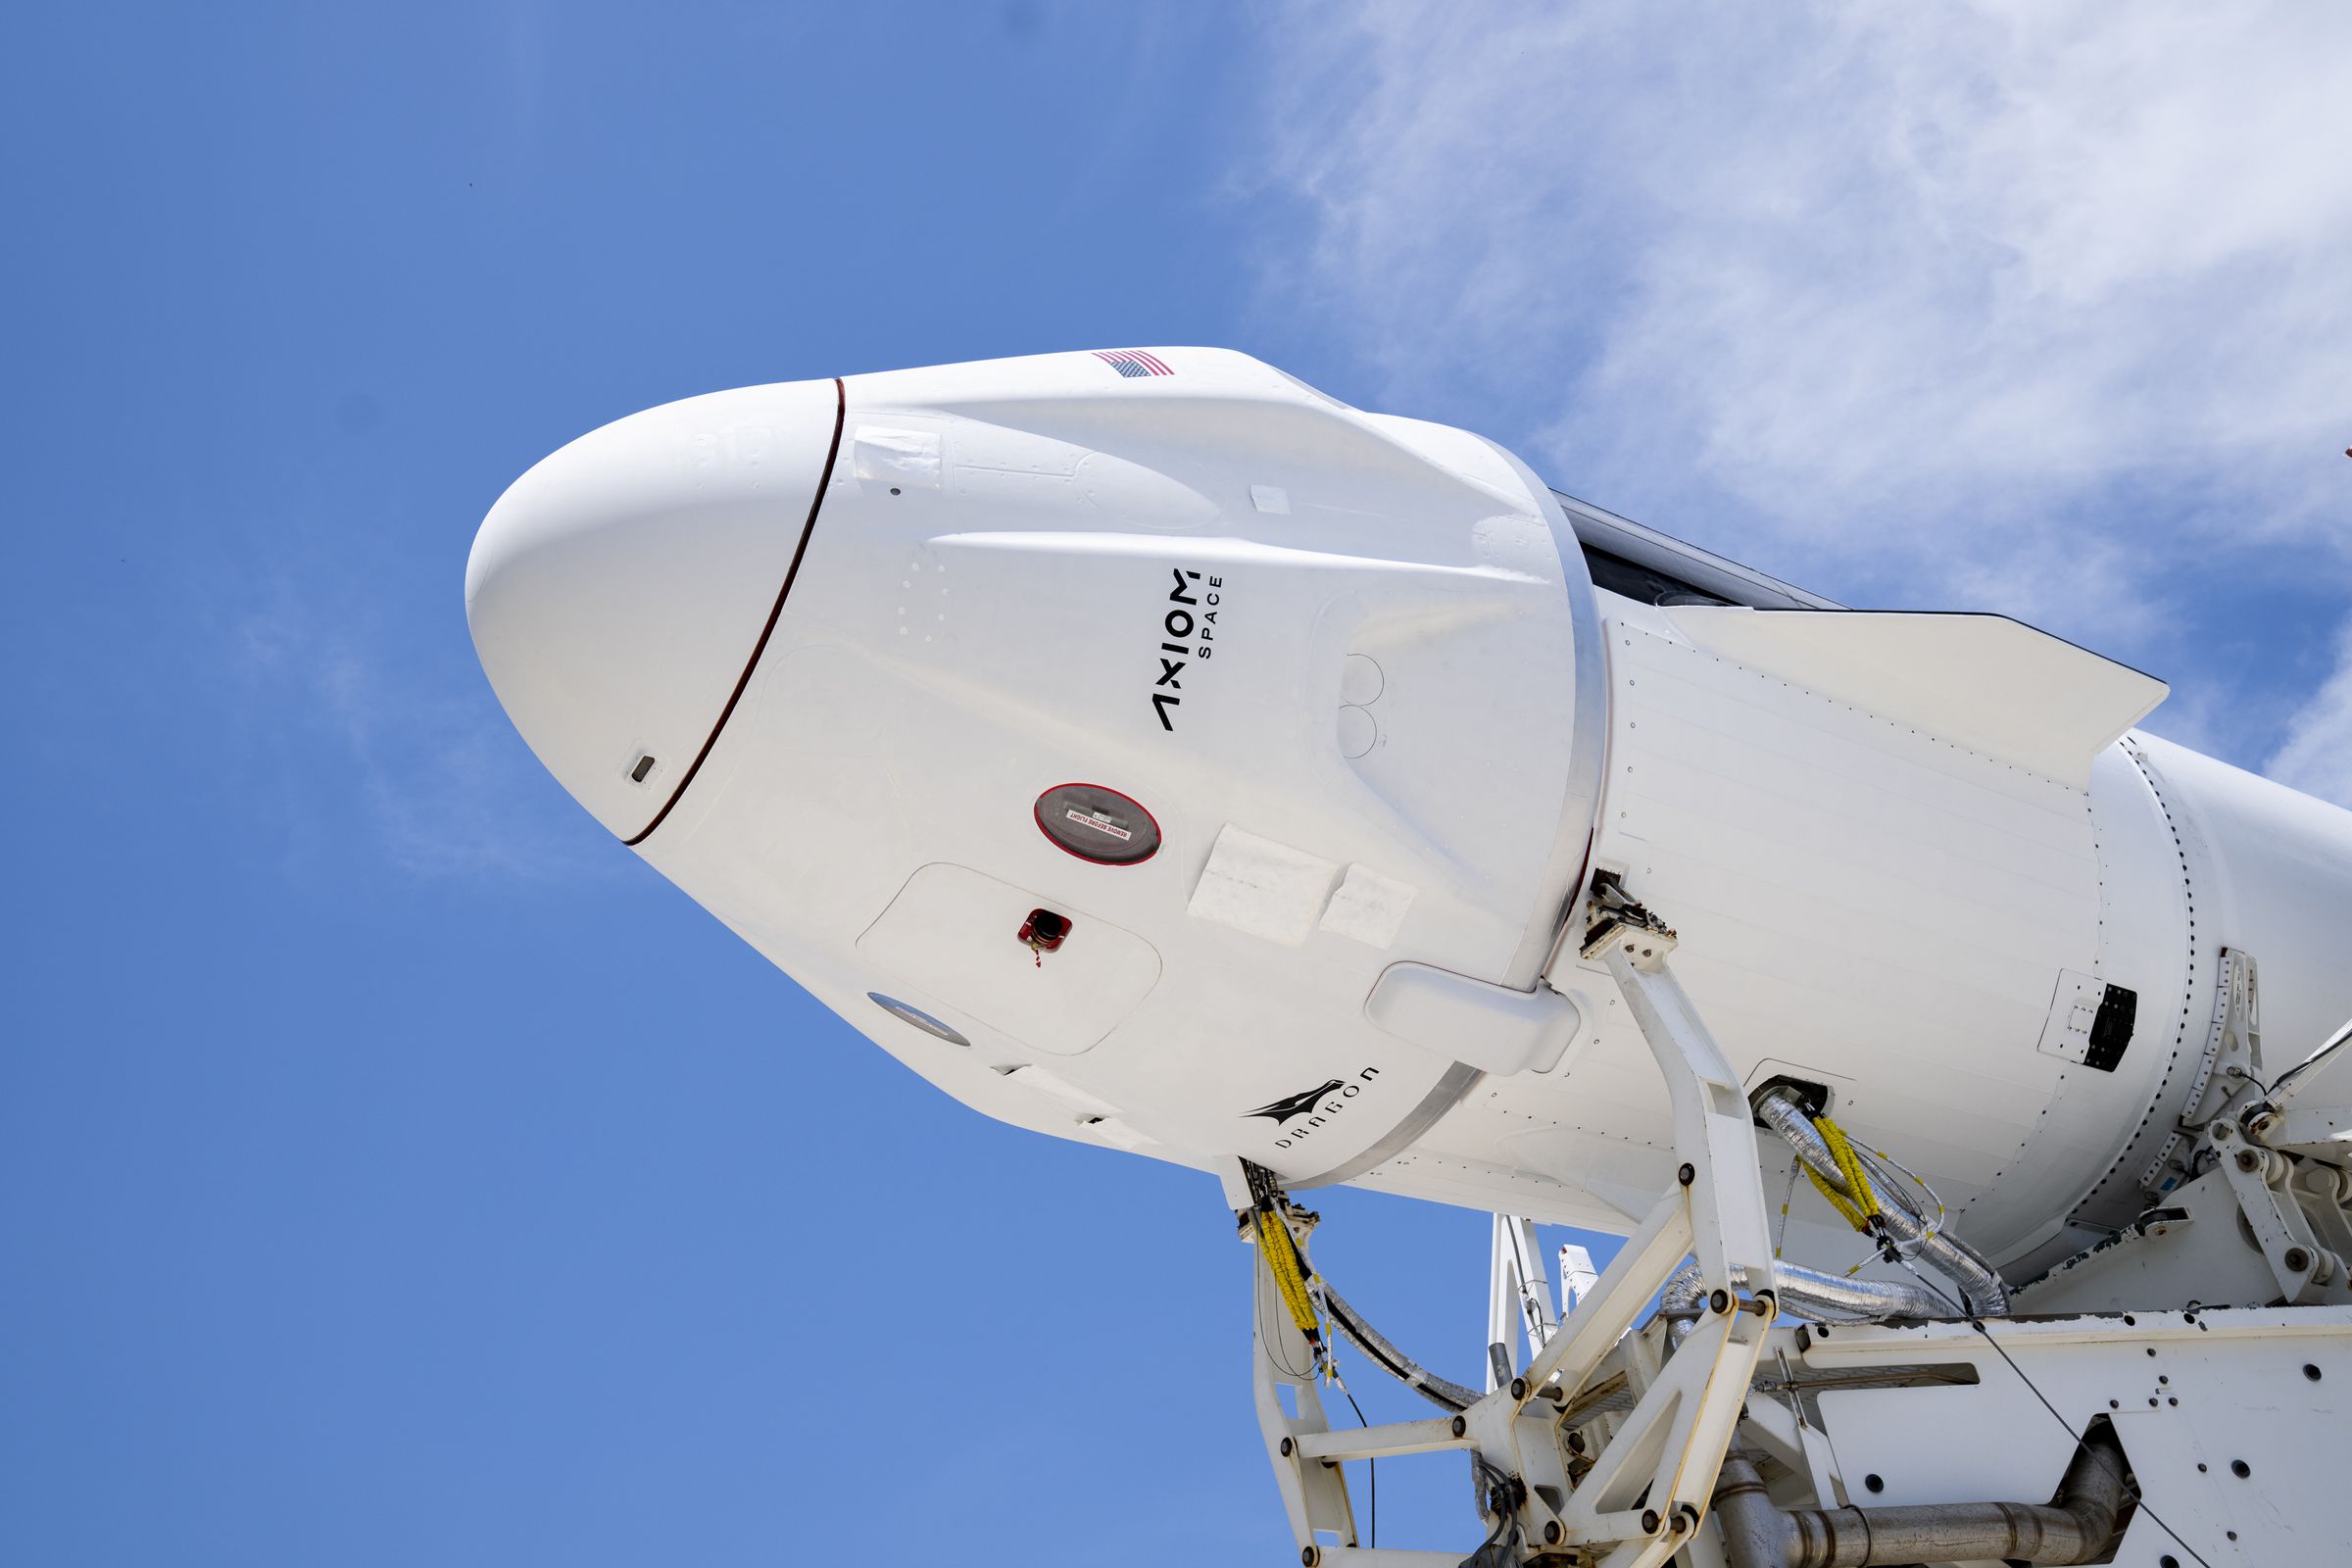 SpaceX’s Crew Dragon with Axiom’s logo adorned on the side.